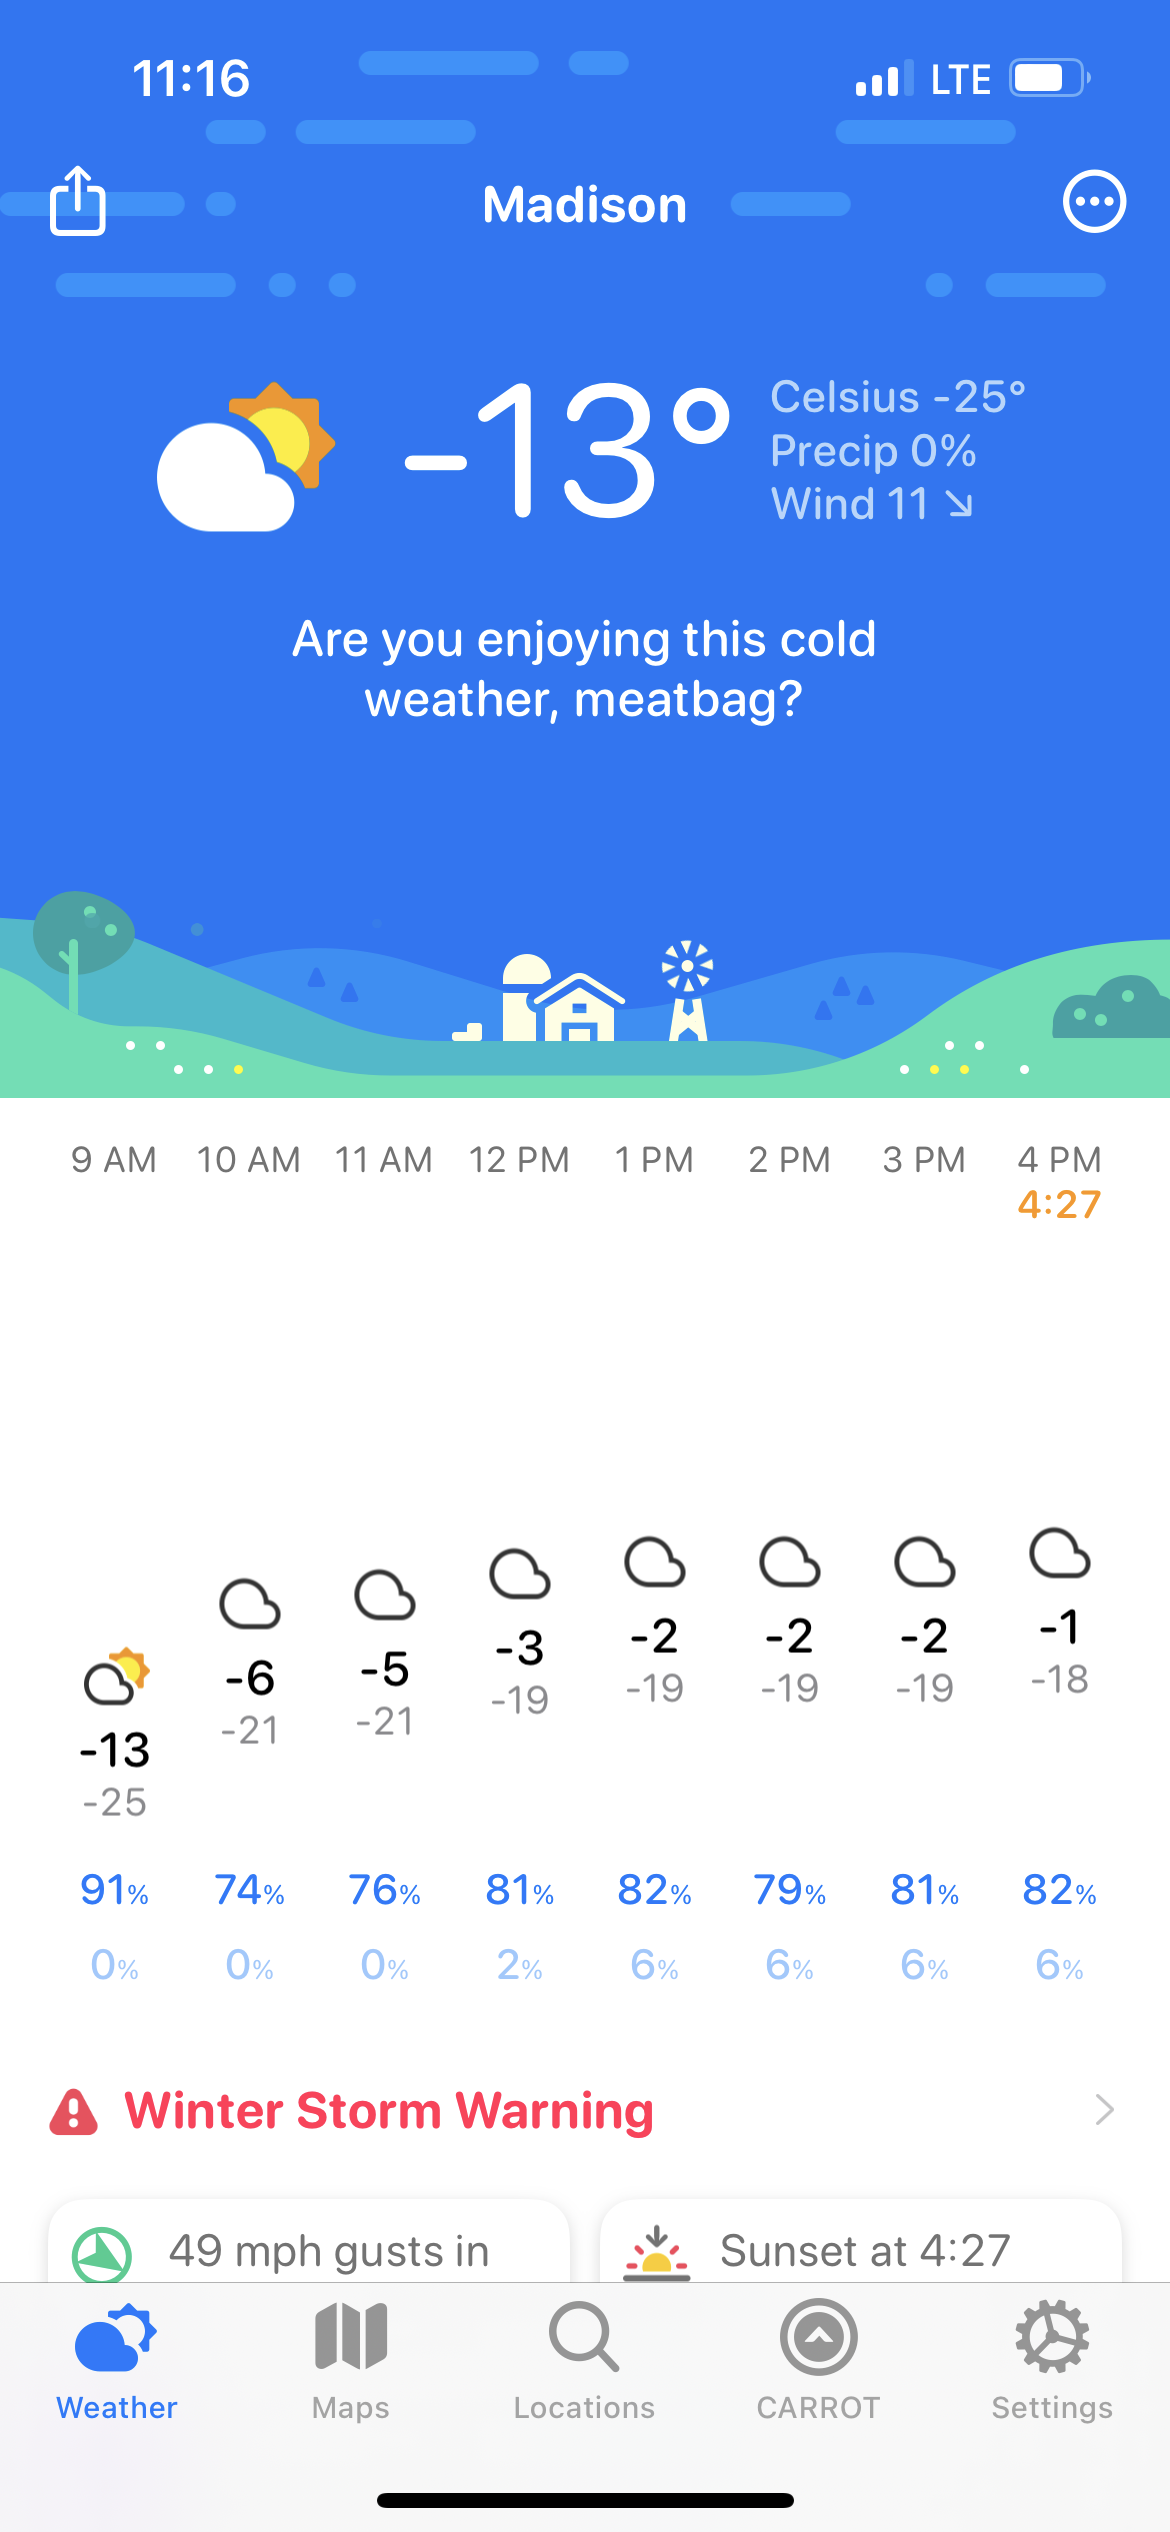 screenshot of current madison weather: -13 Fahrenheit, -25 Celsius with a winter storm warning and 49 mile an hour wind gusts this afternoon. 